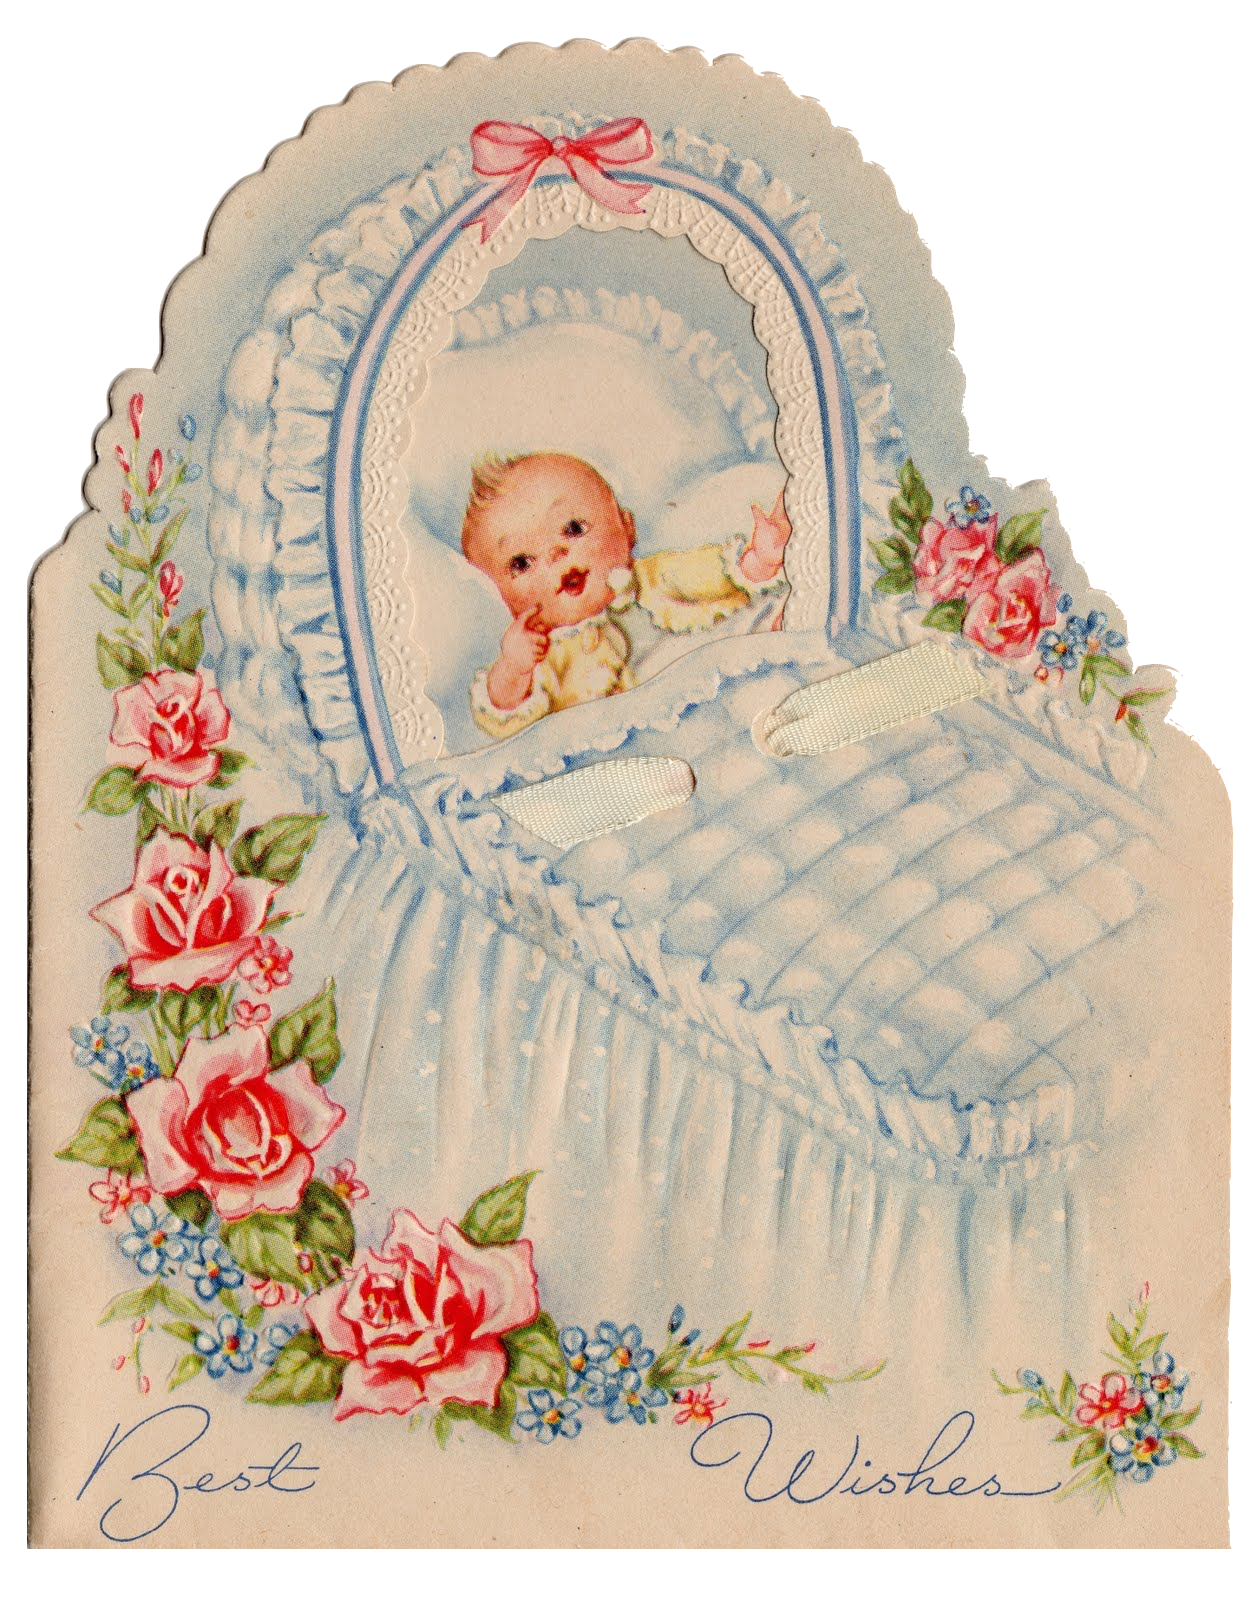 Vintage Baby in cradle bassinet Congratulations Card red roses blue and pink best wishes